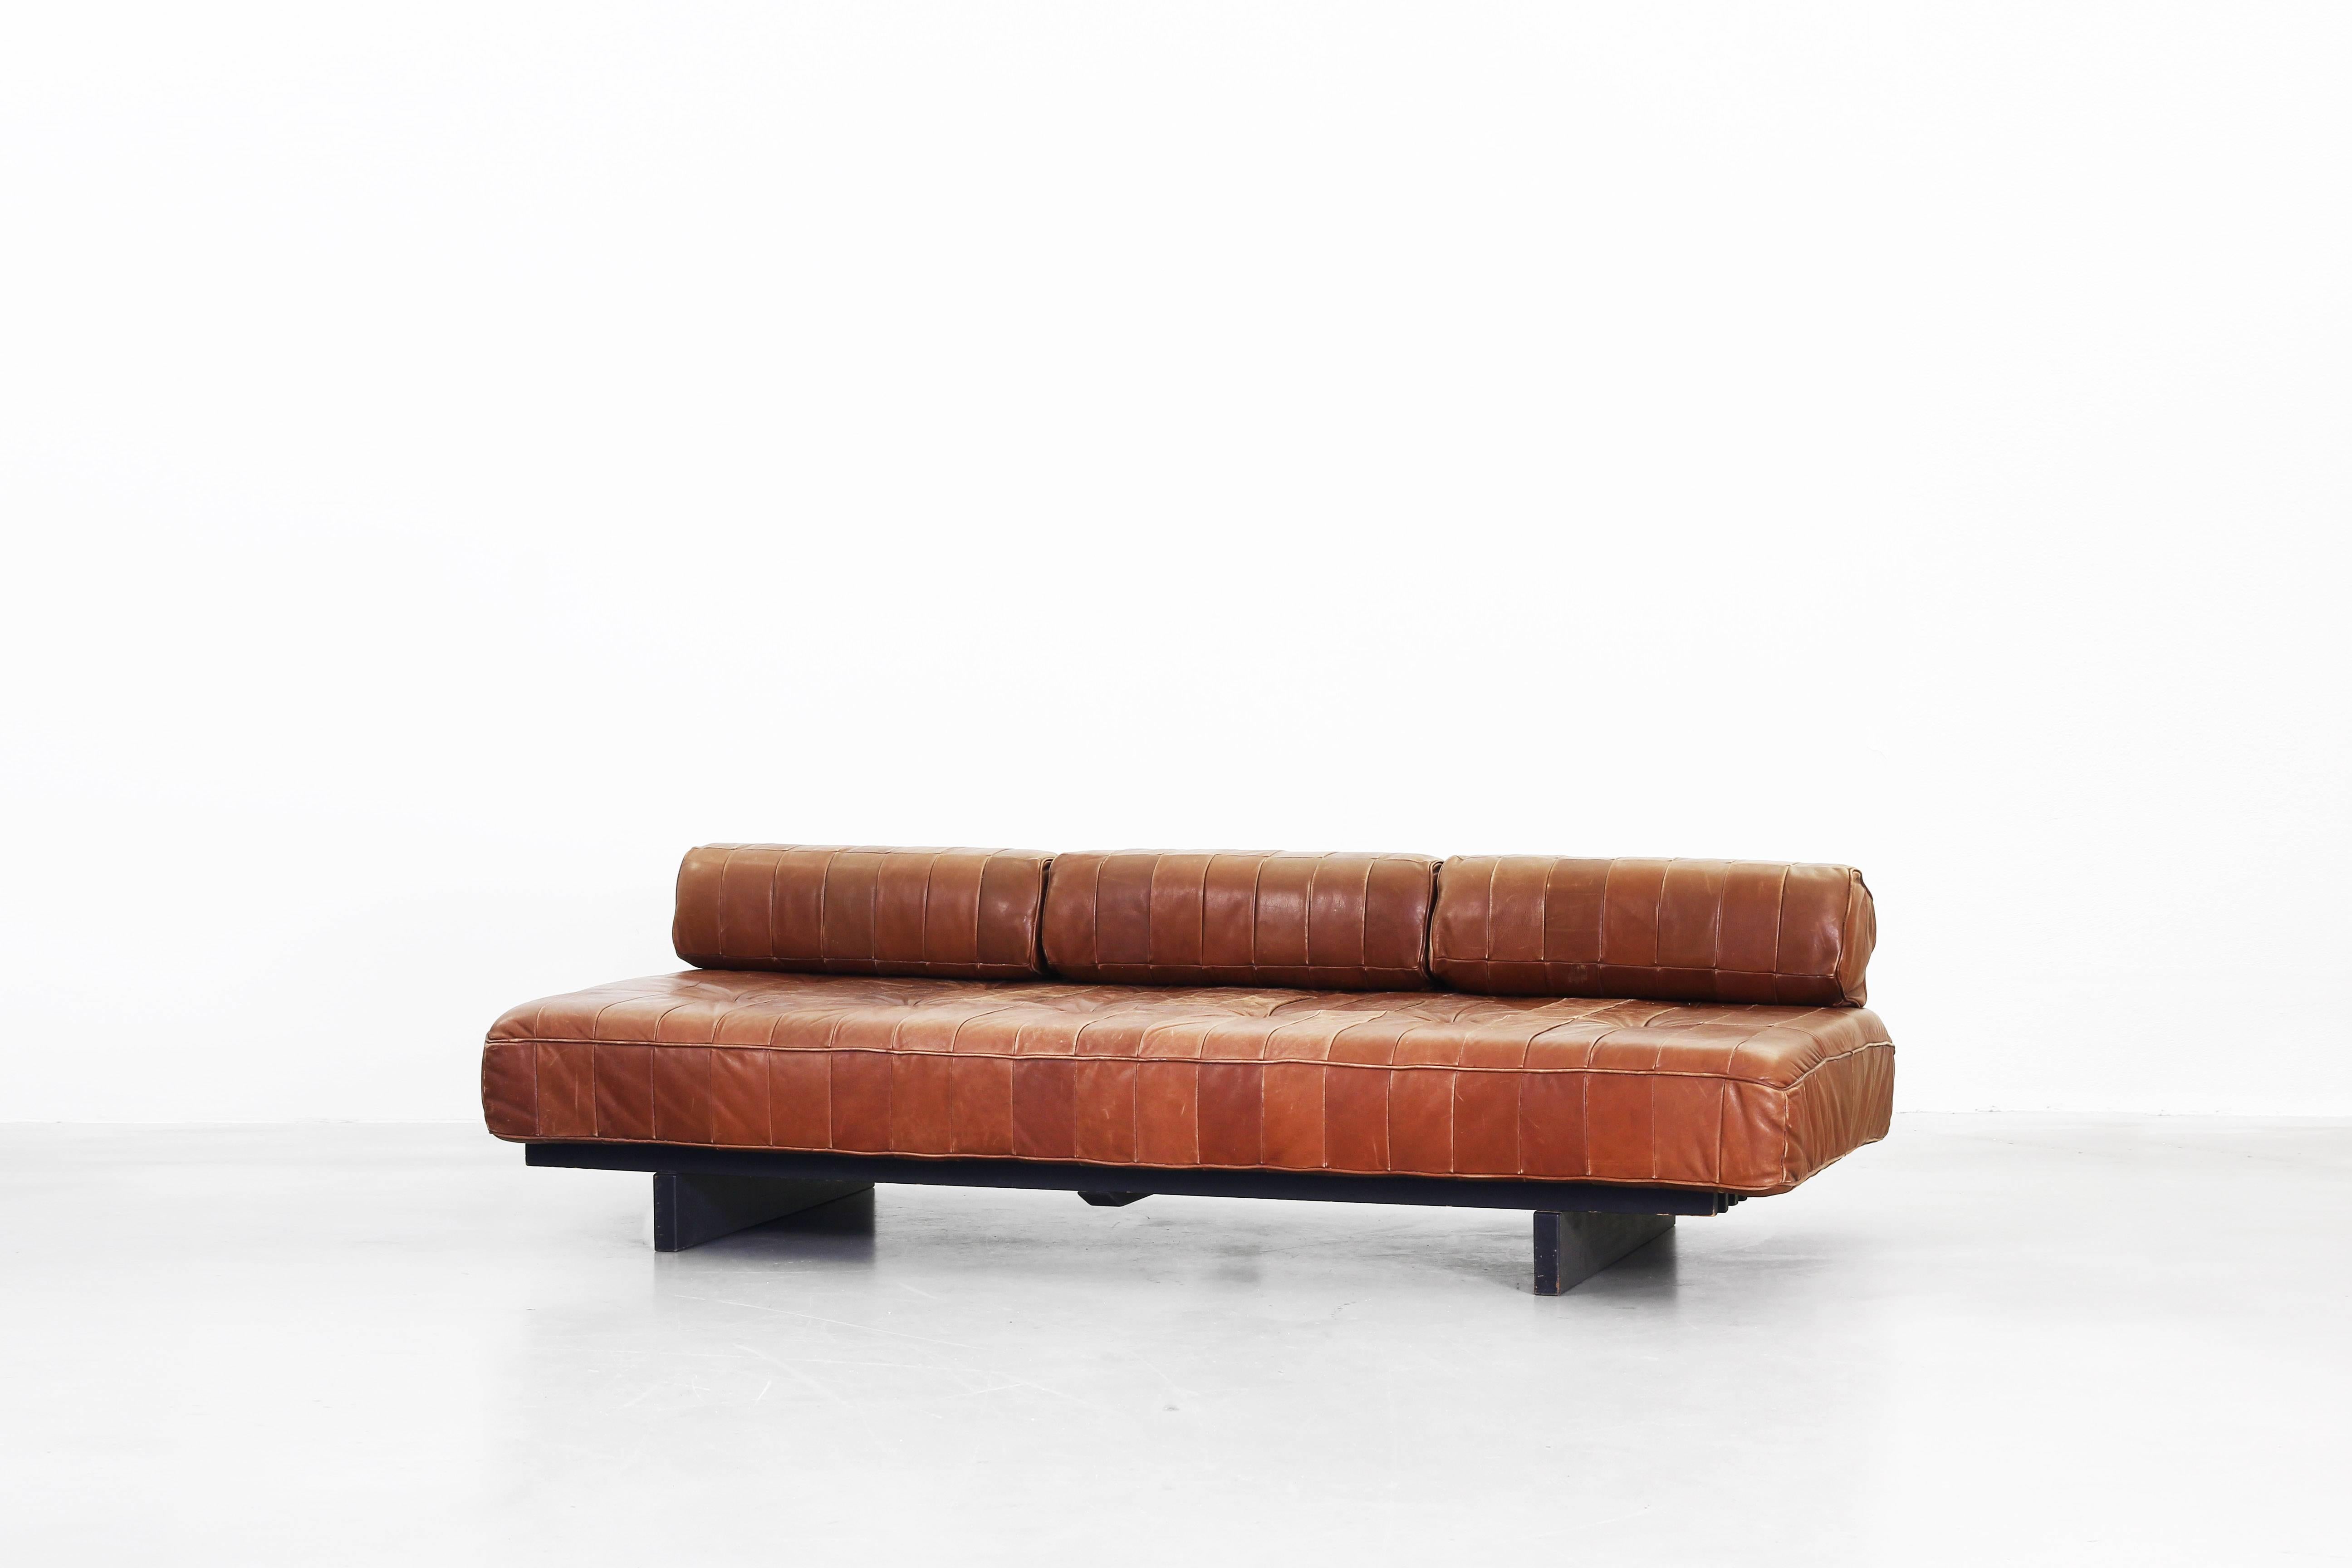 Very beautiful daybed manufactured by De Sede in Switzerland in the 1970s. The daybed comes with three cushions and a gorgeous patinated brown-cognac leather. It is in a very good original condition without any damages or repairs. We have a matching